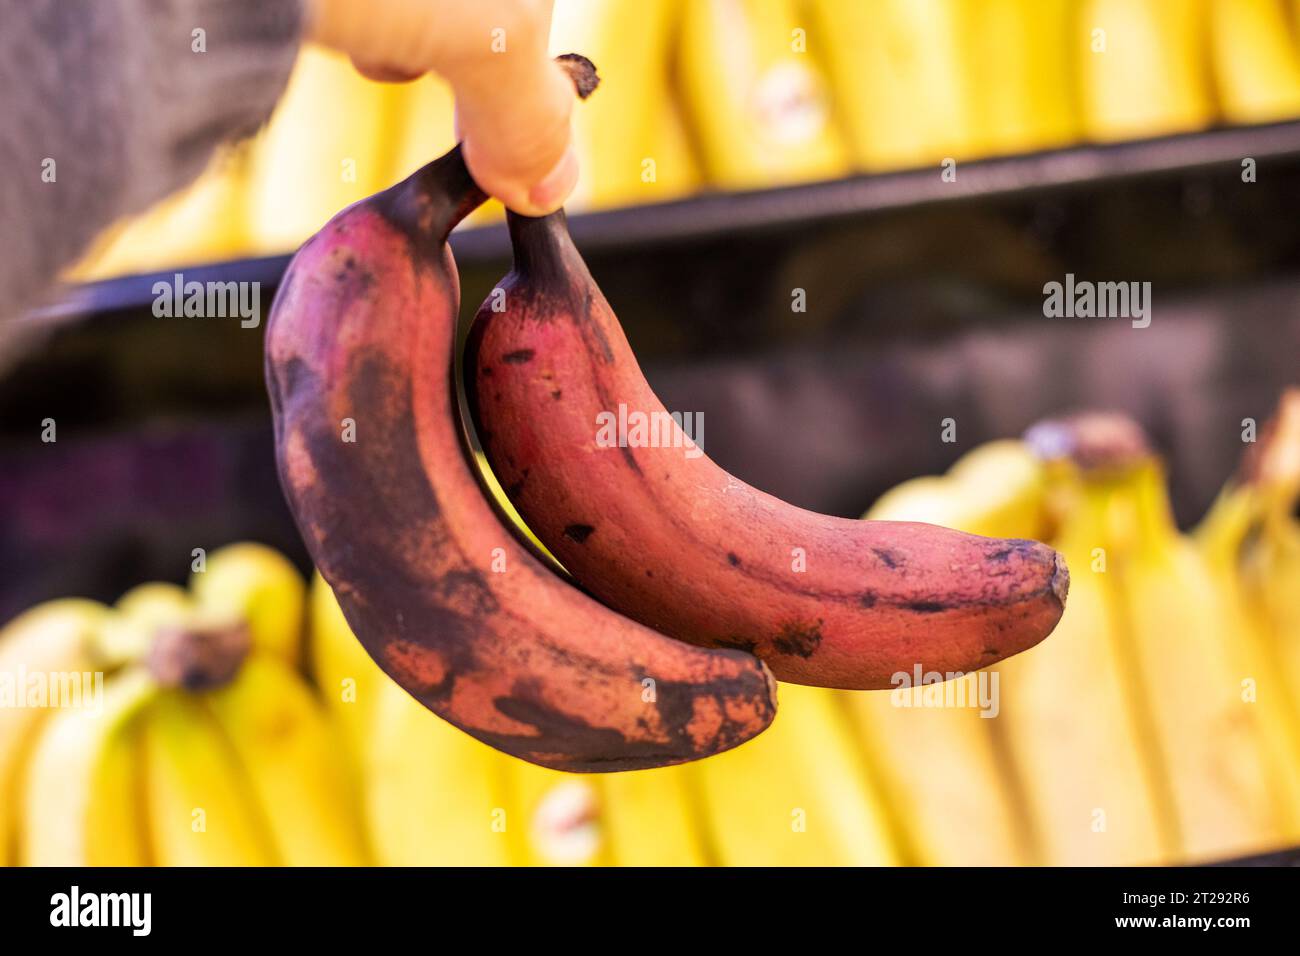 holding in hand a bunch of small brown bananas in a supermarket store Stock Photo